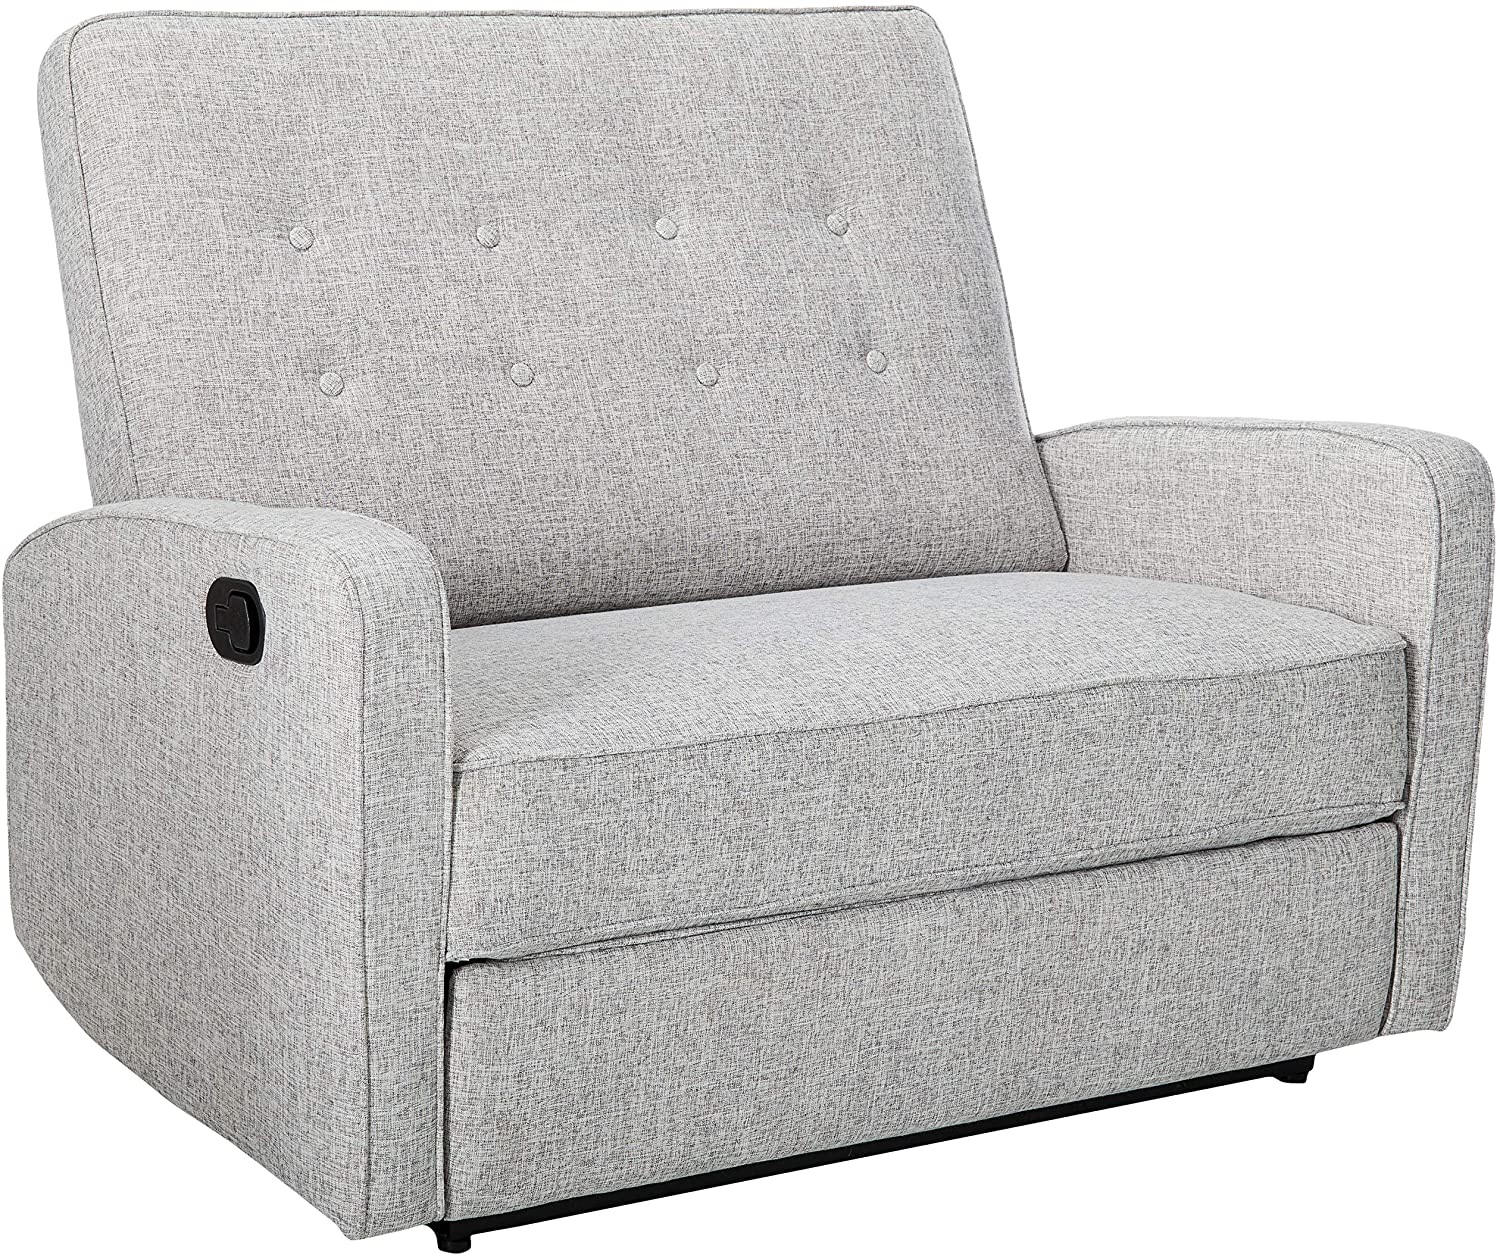 Chair and a Half Recliners - Christopher Knight Home Callade Reclining Loveseat Light Grey Tweed + Black